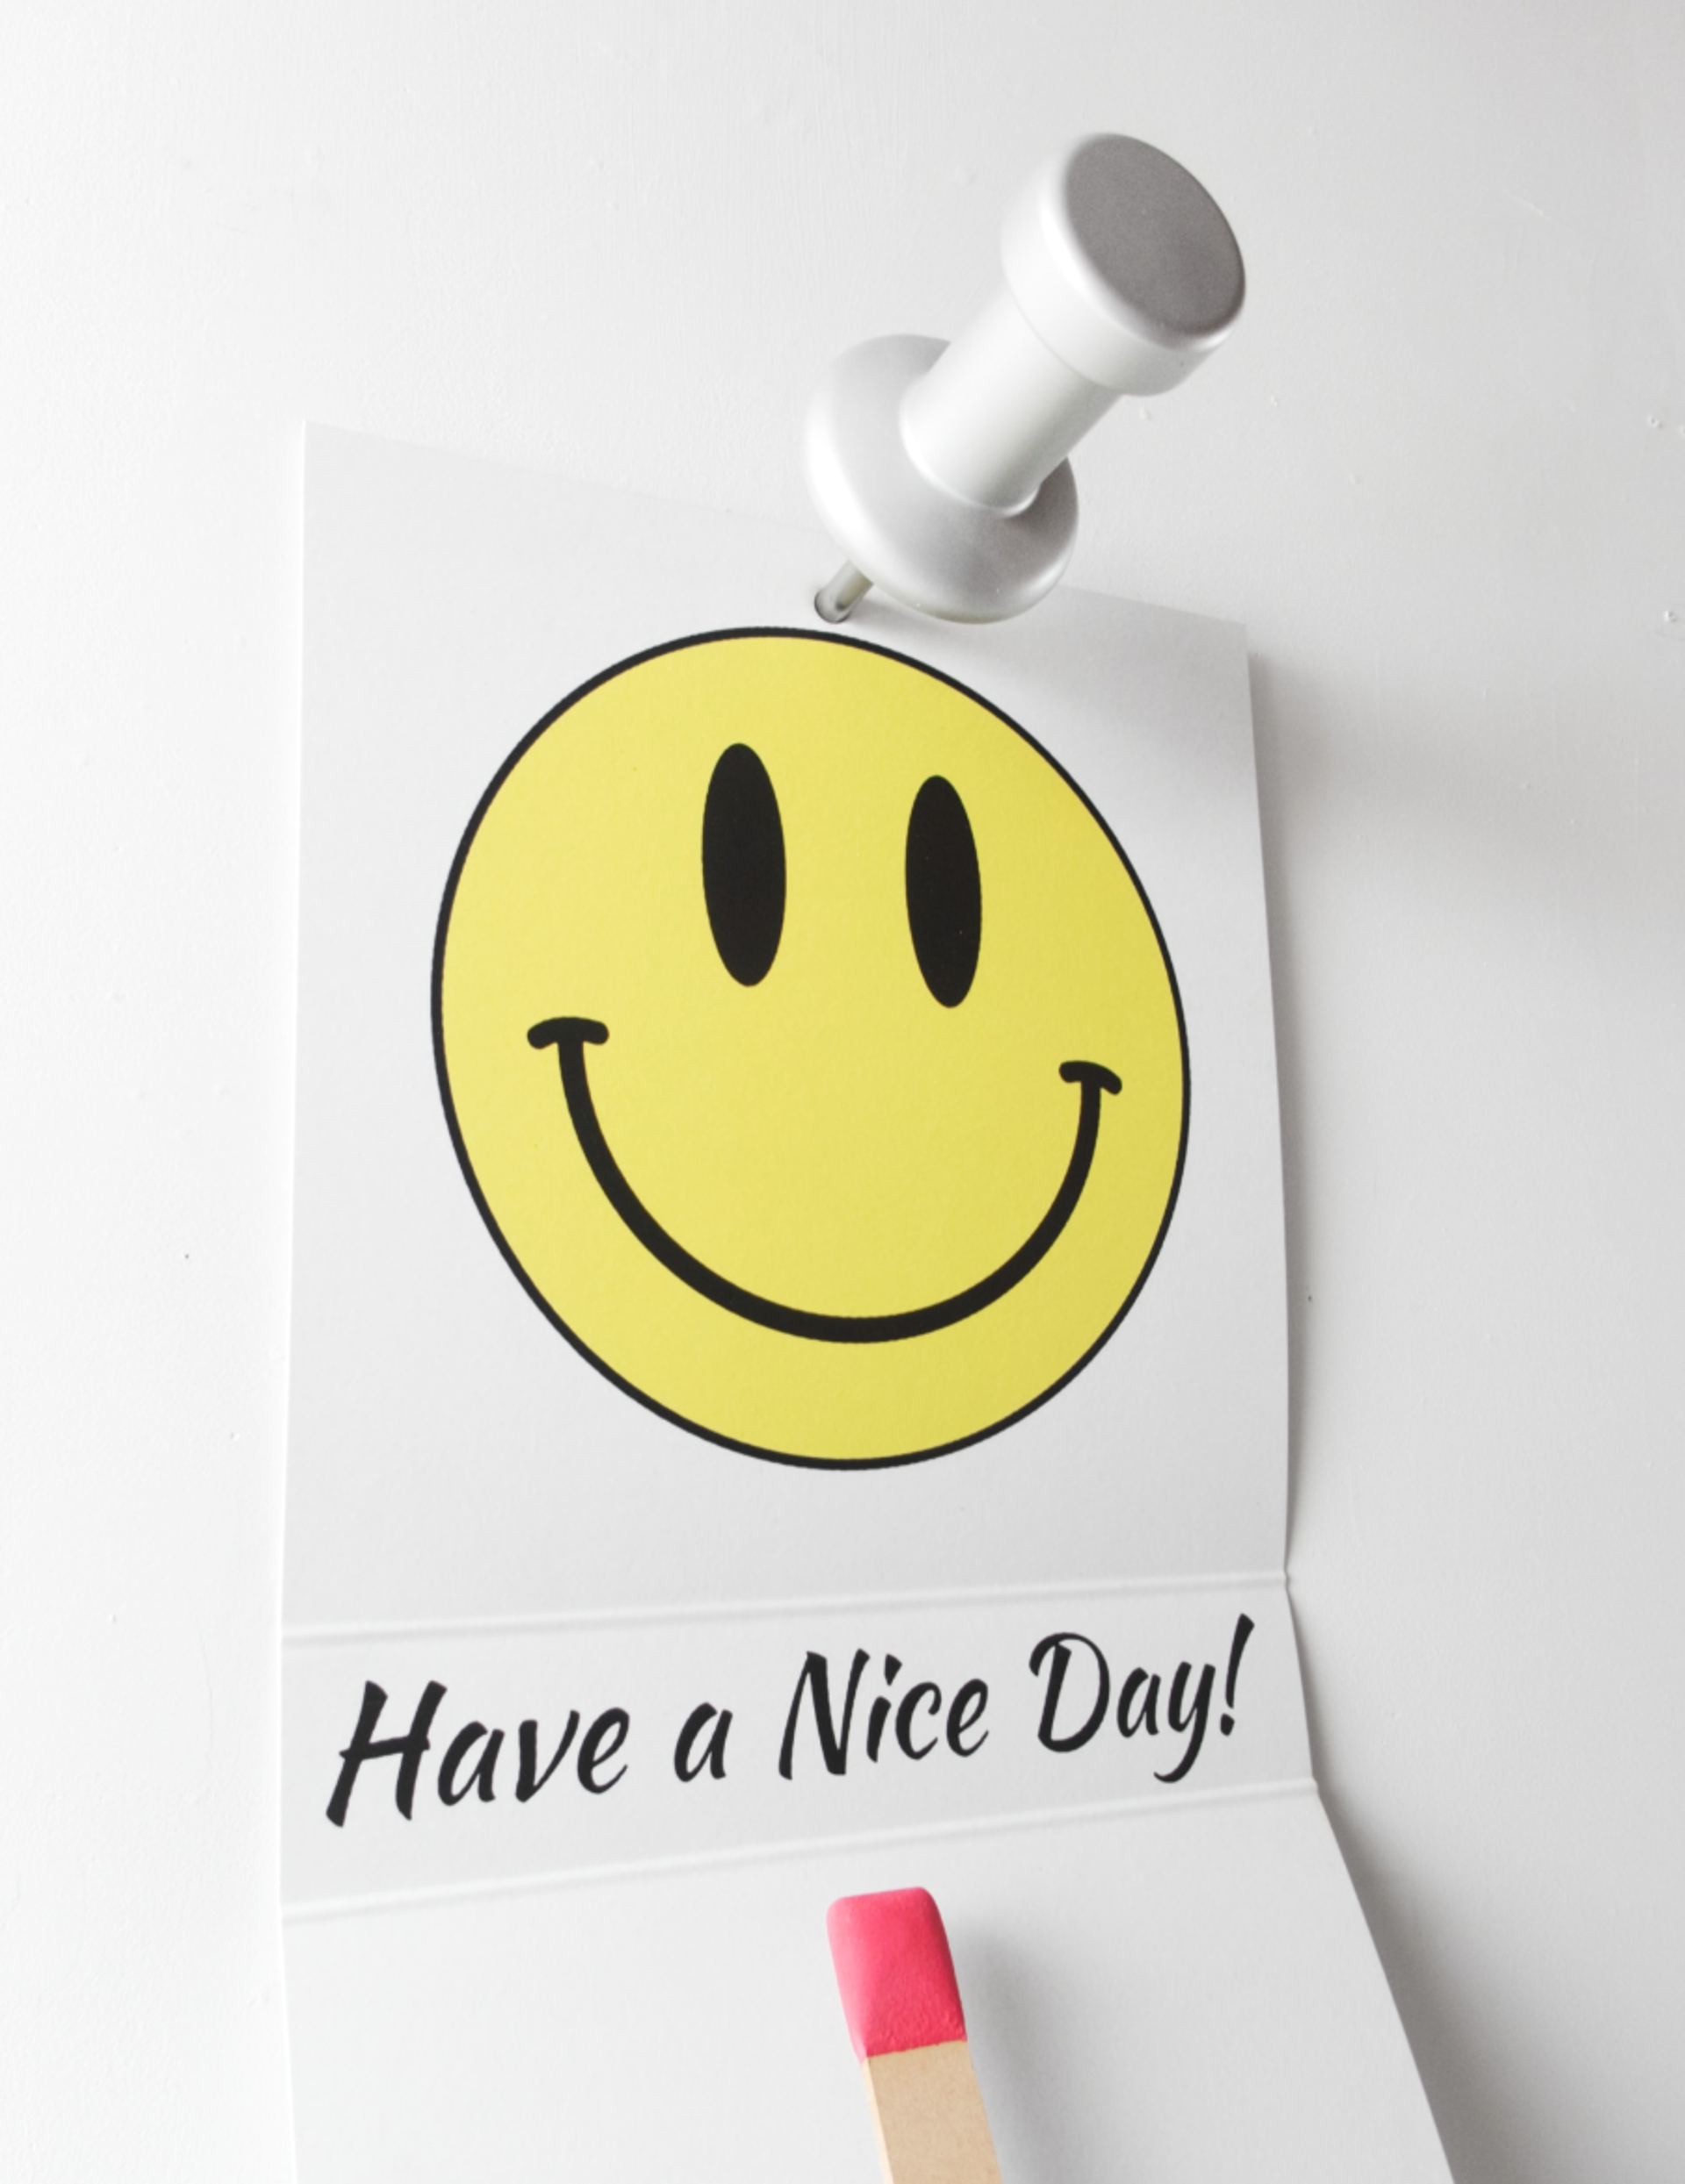 Have a Nice Day! by Miles Jaffe